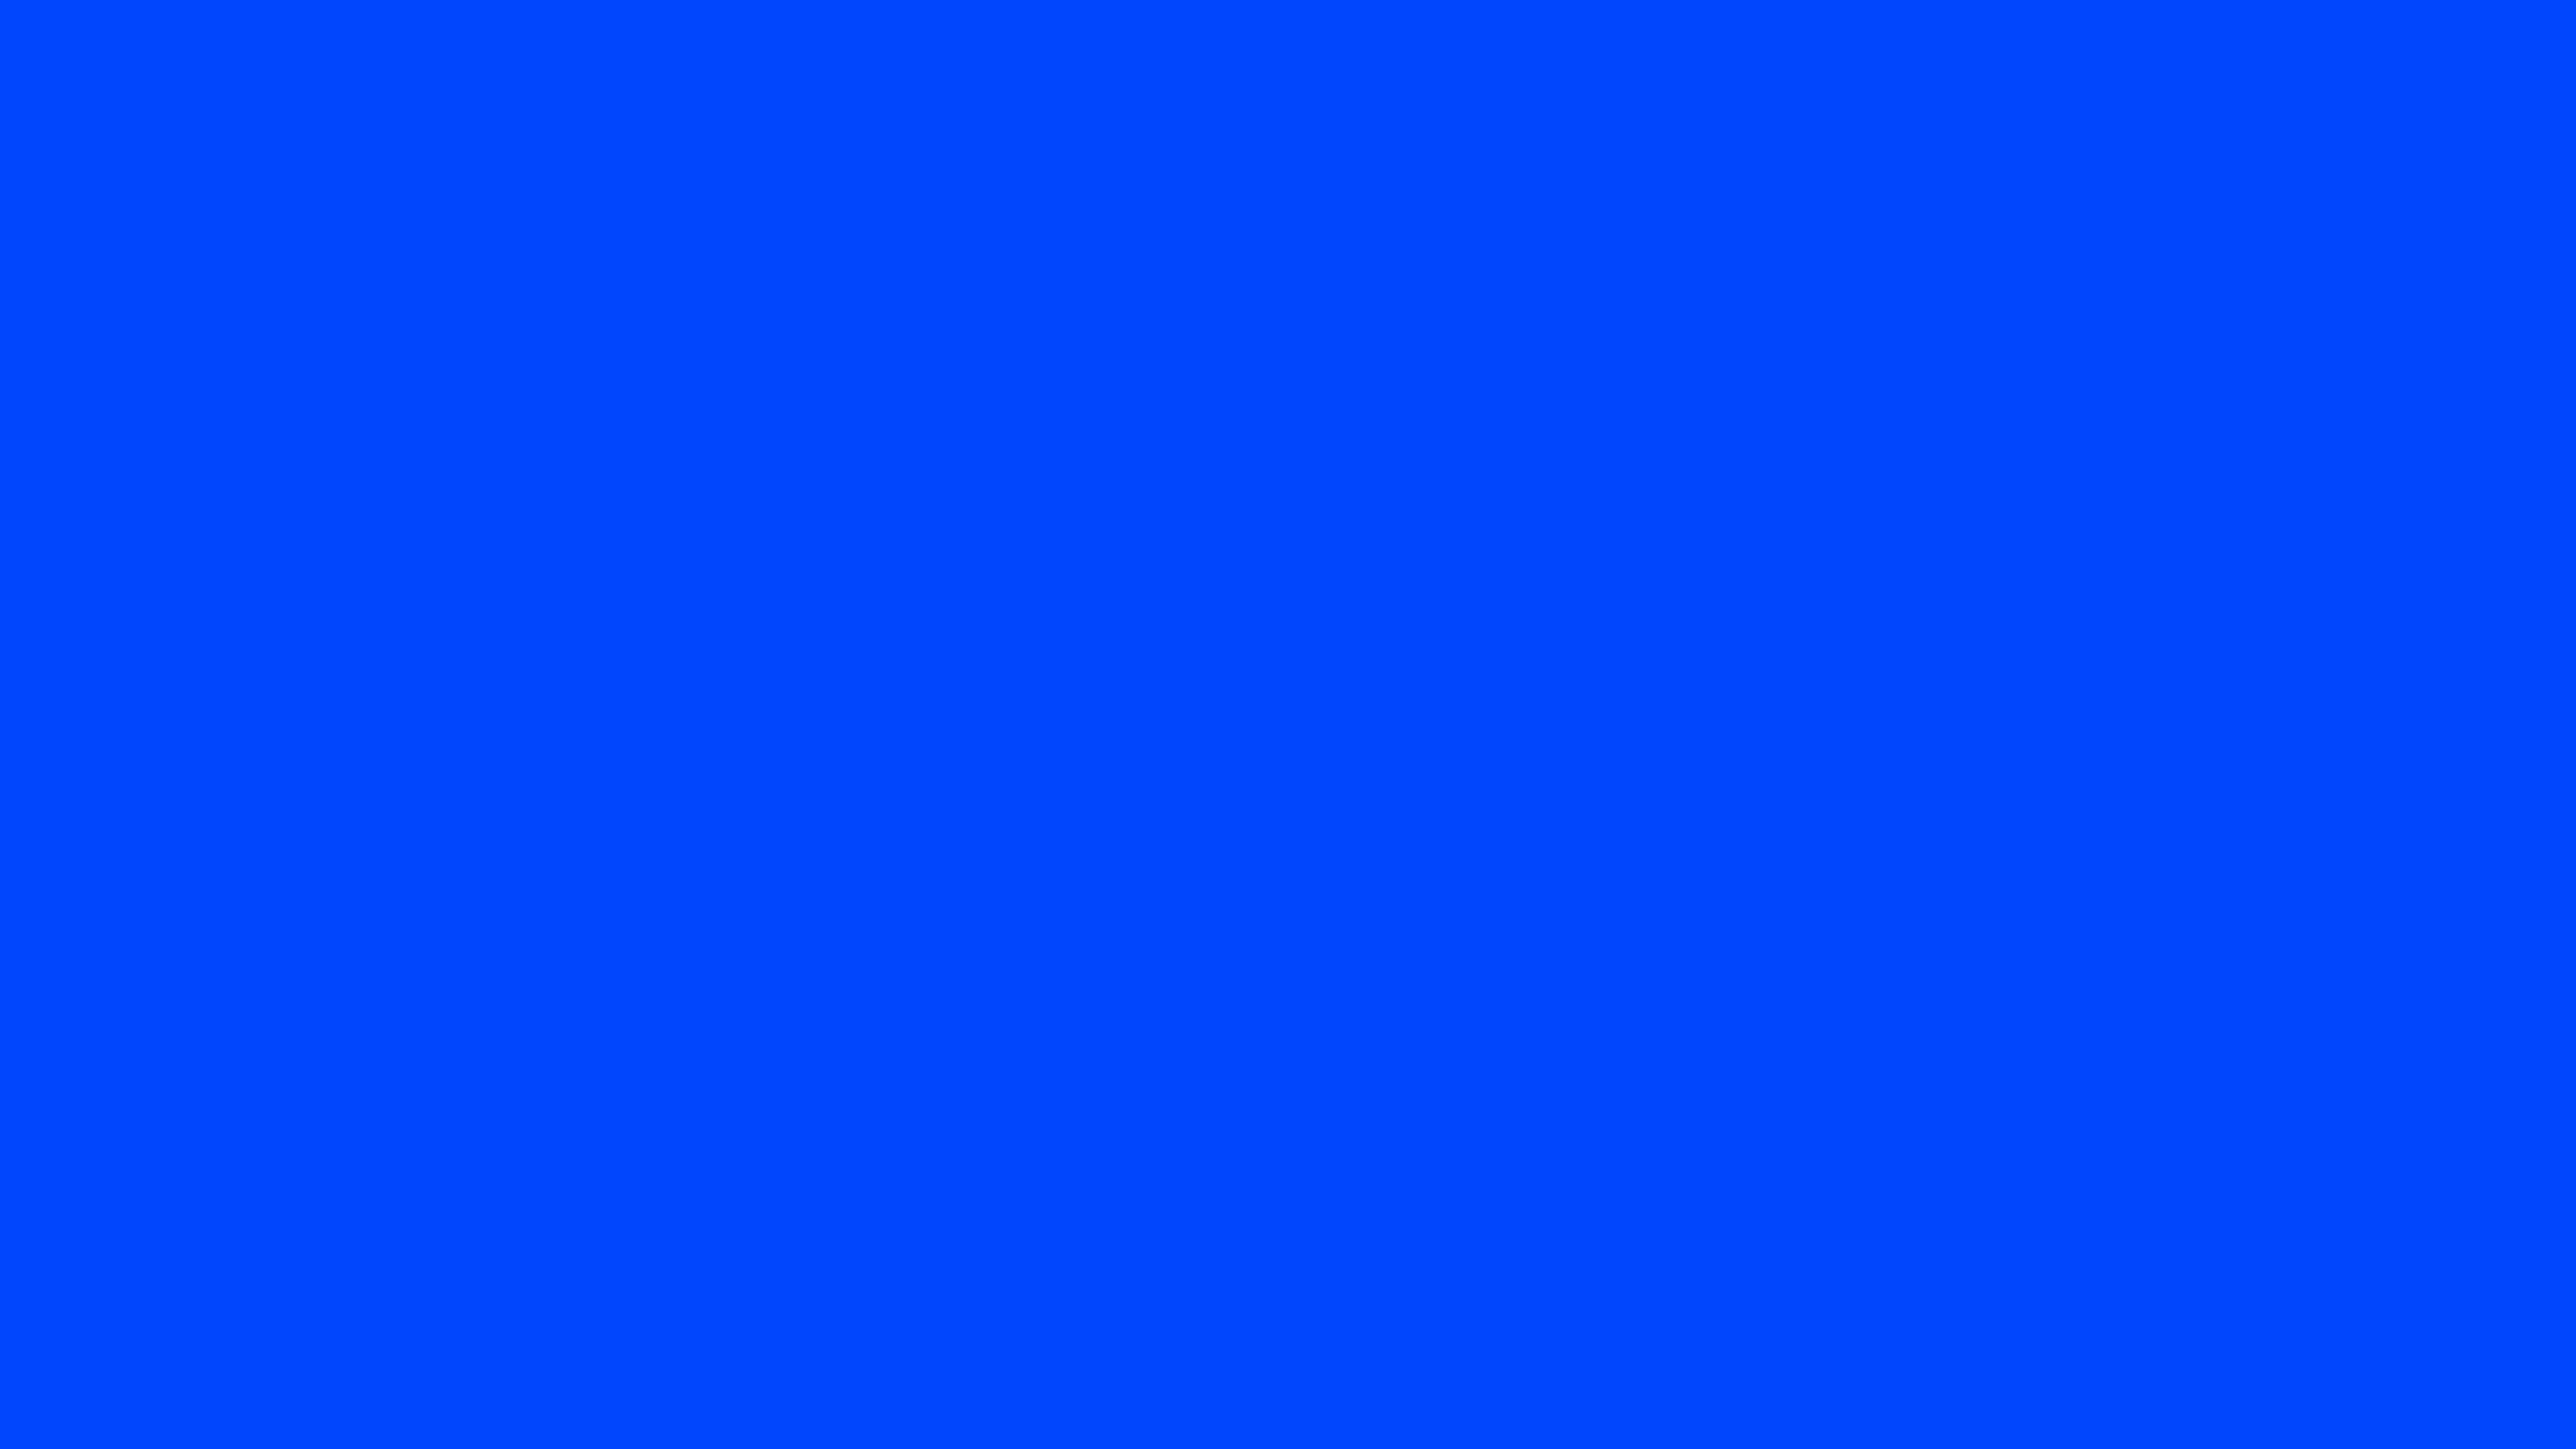 3840x2160 Blue RYB Solid Color Background